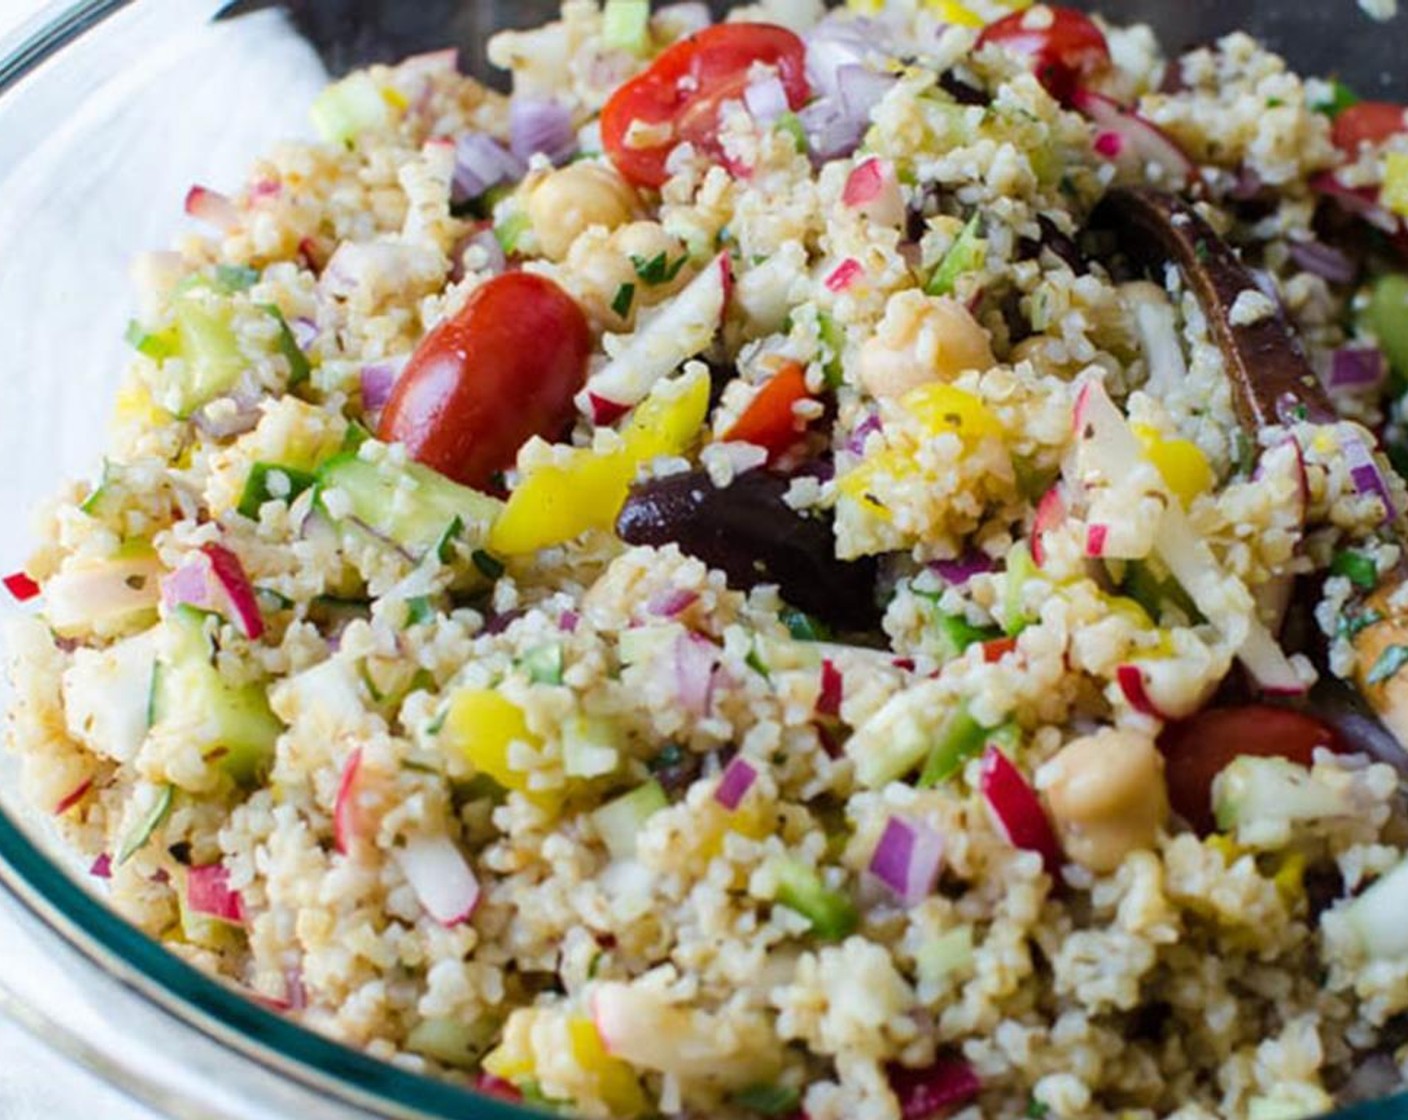 step 7 When the bulgur wheat has cooled to room temperature, add it to the chopped vegetables and toss to combine. Add about half of the dressing to the salad and toss until coated. Taste for seasoning.